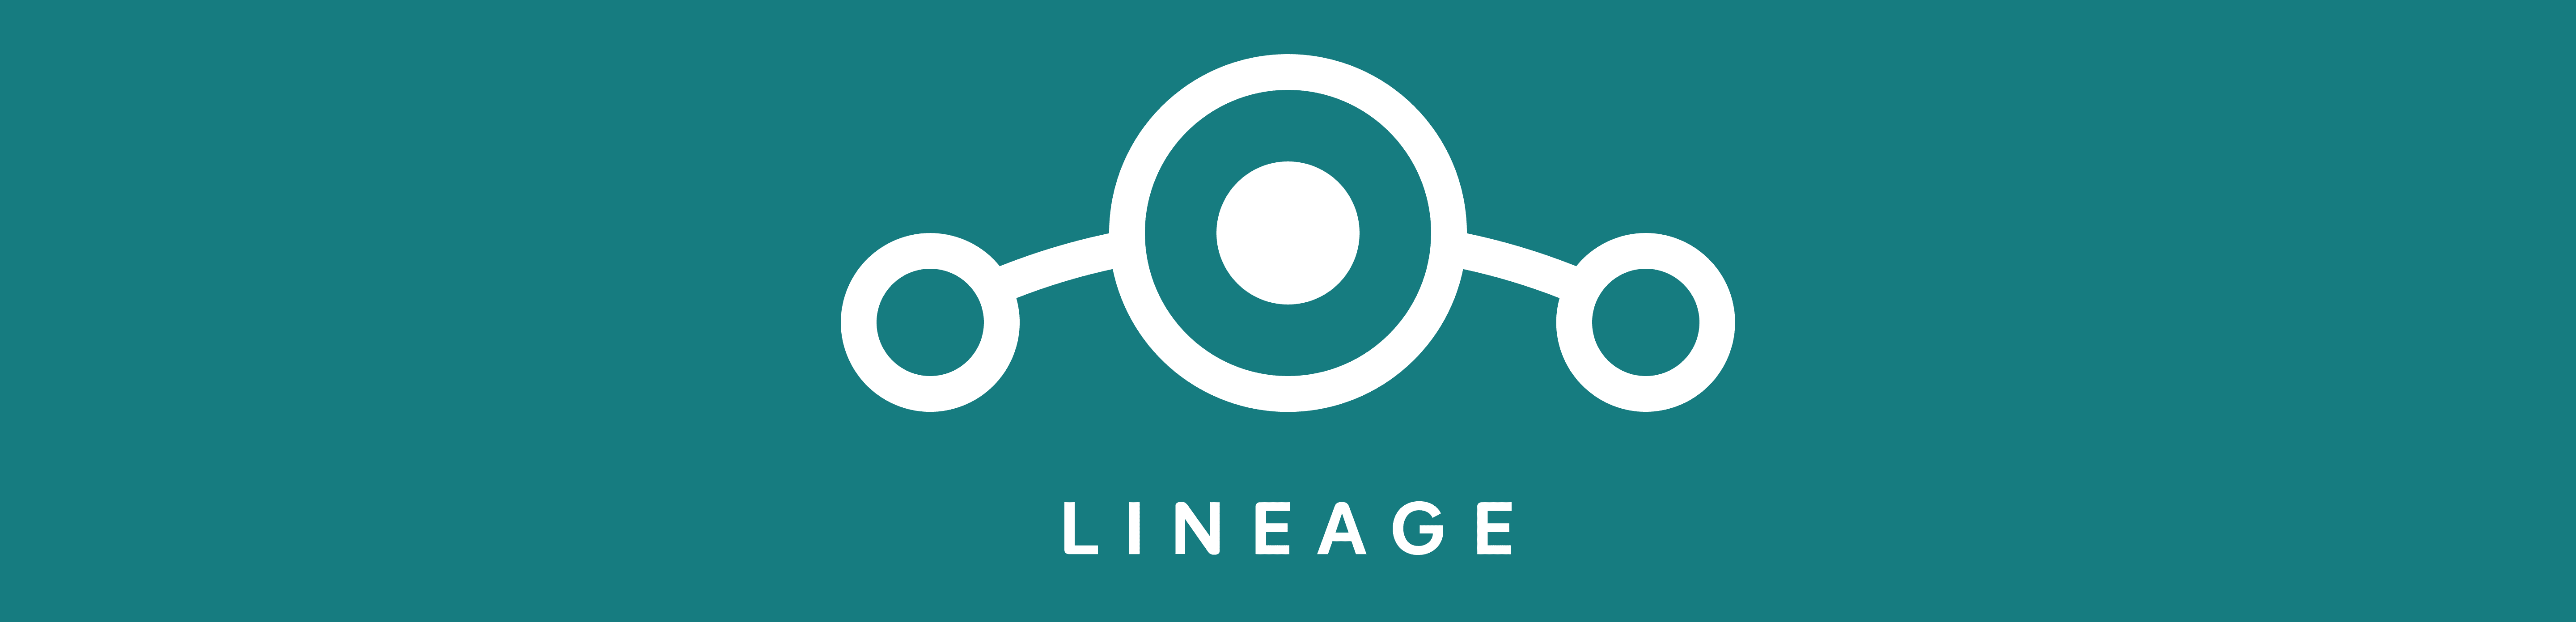 Lineage svg #12, Download drawings